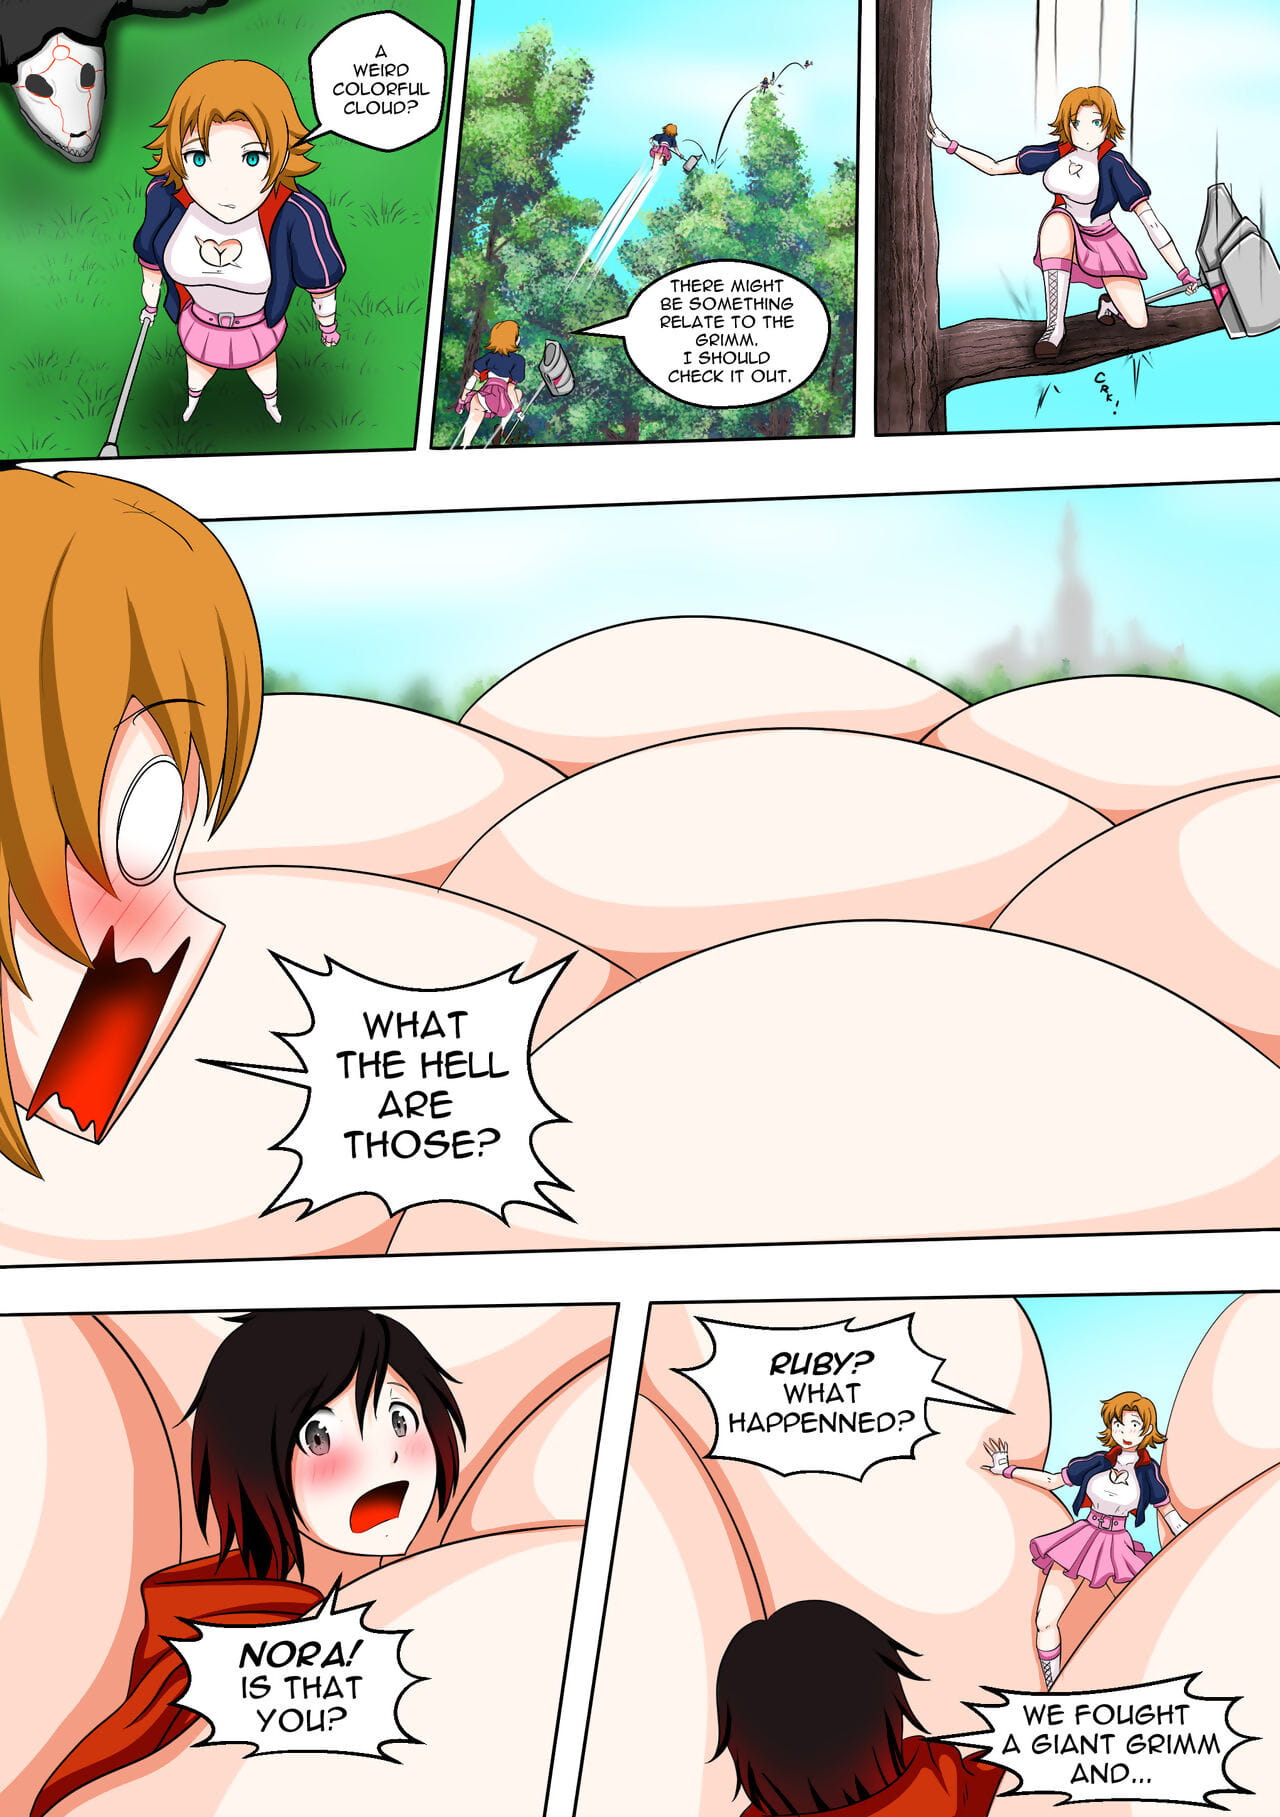 escapefromexpansion ฝุ่น expansion 2 page 1